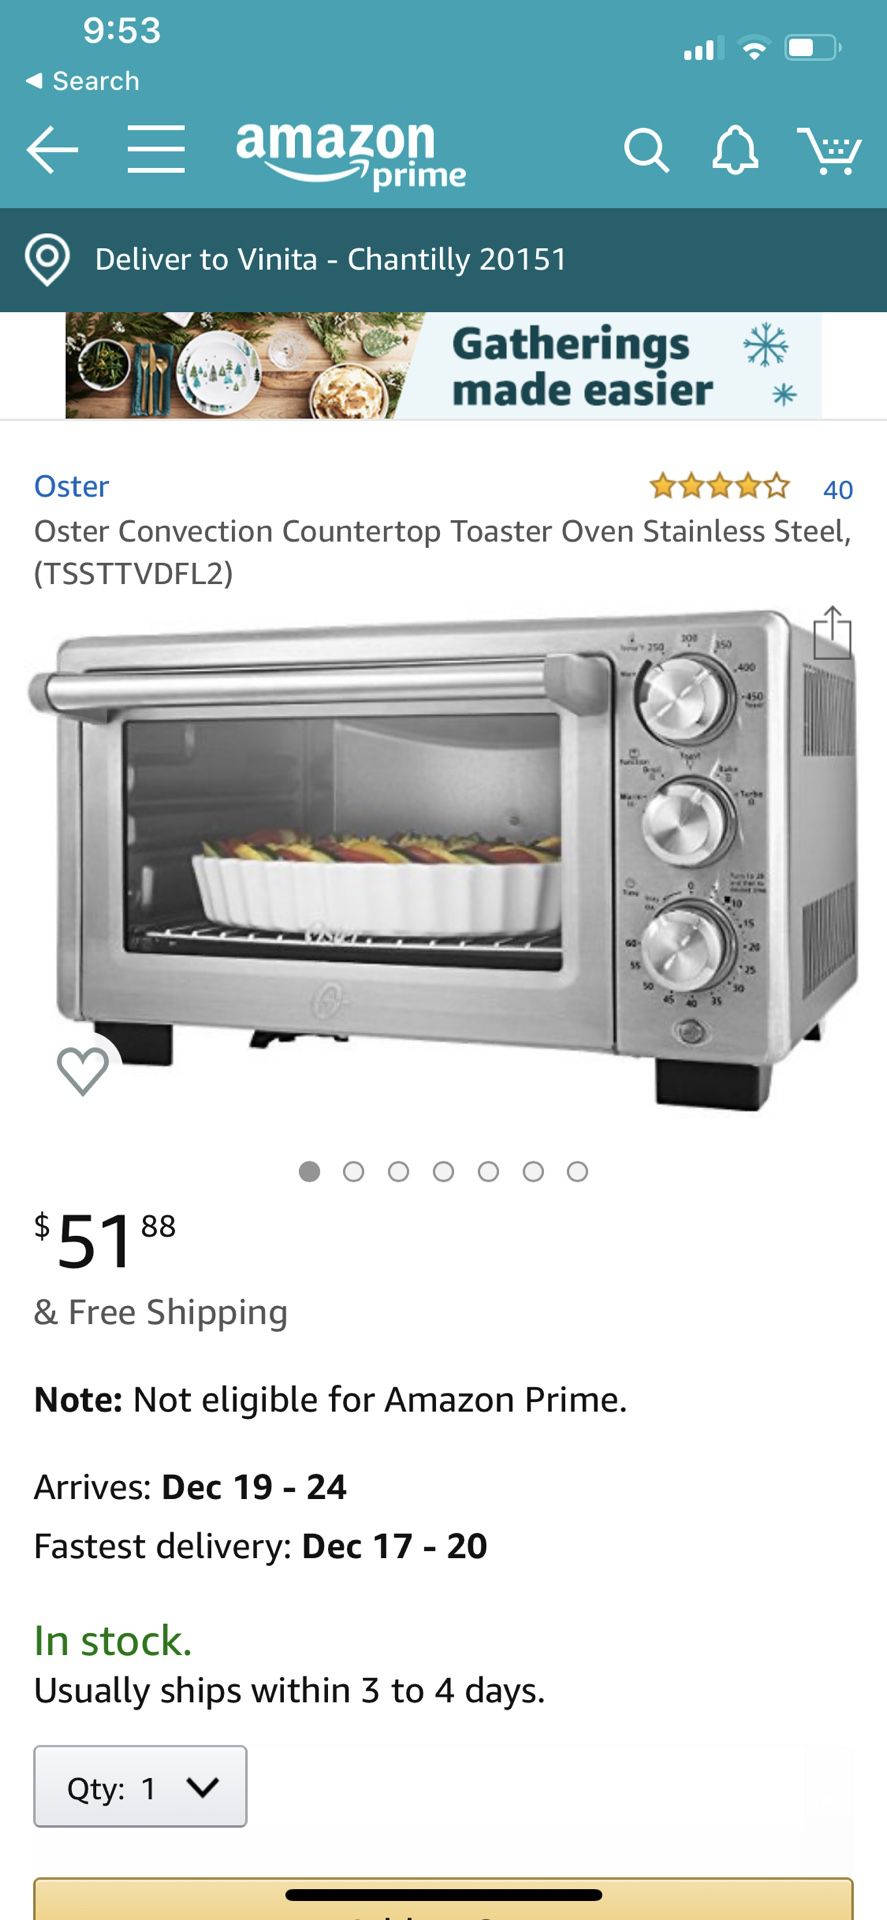 Oster Convection Countertop Toaster Oven Stainless Steel,